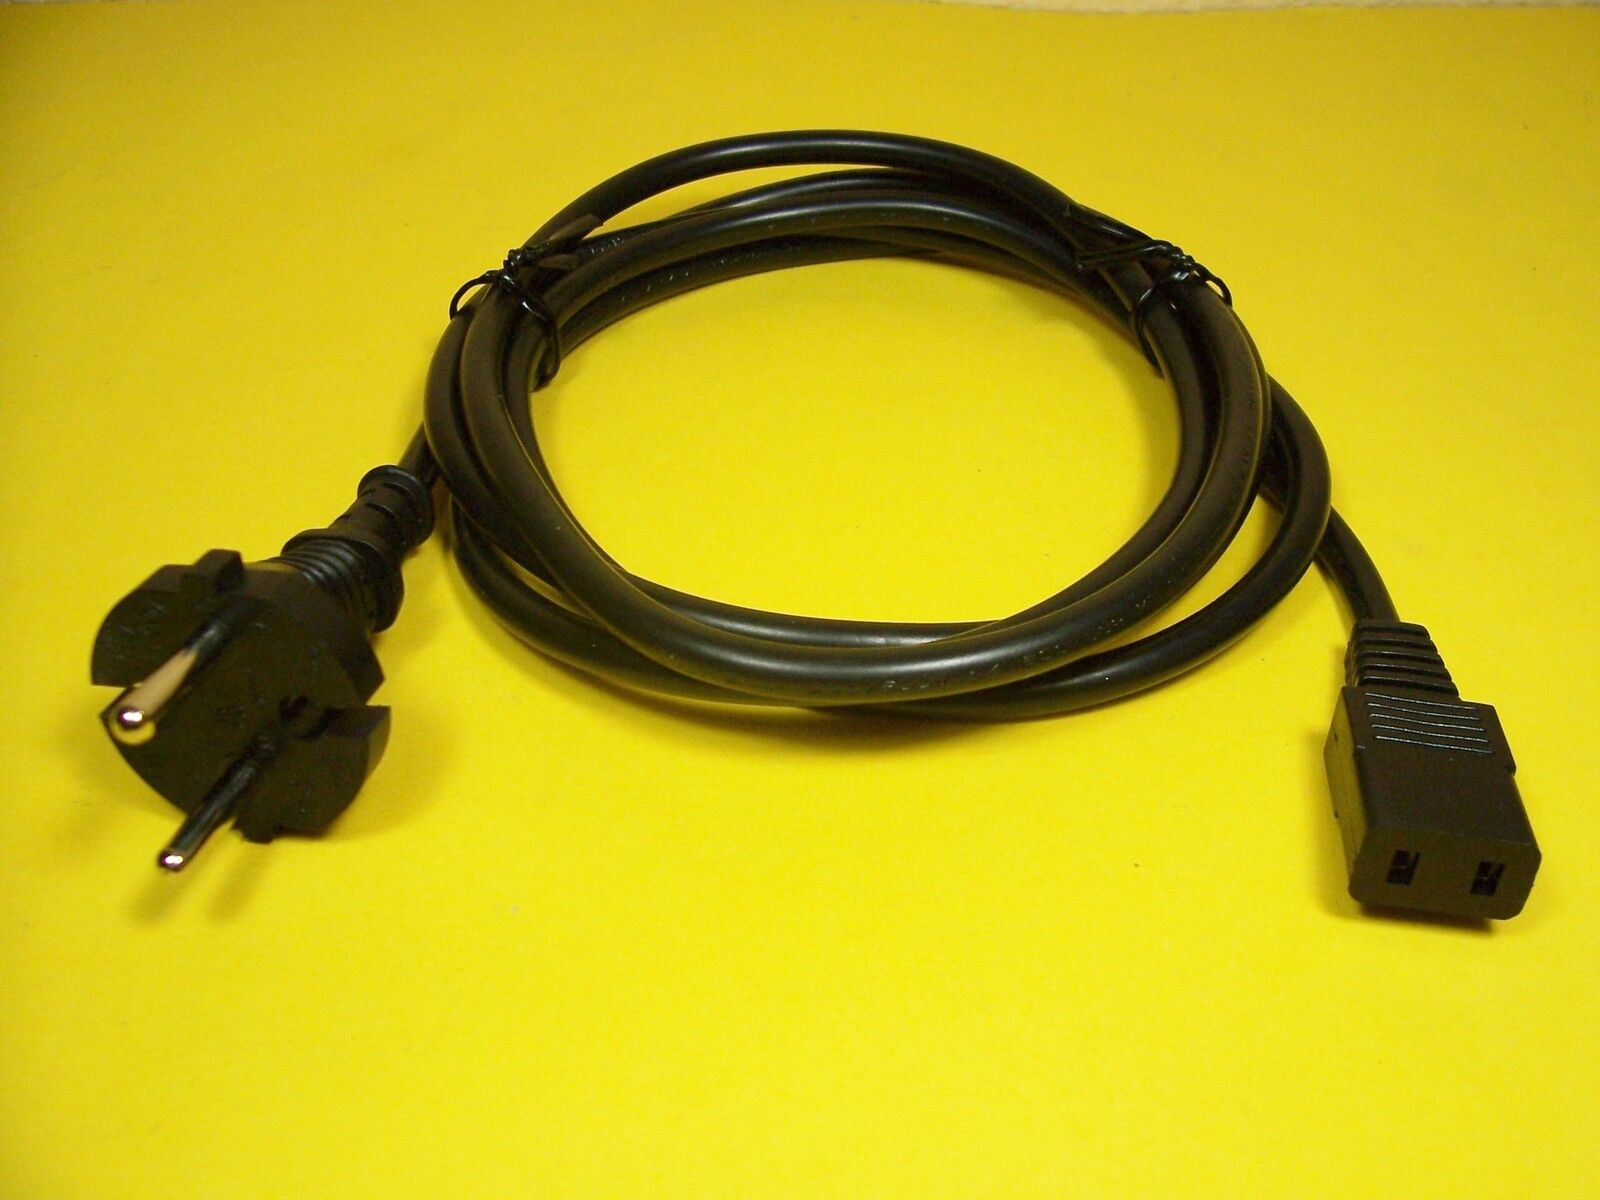 2-pin power cord for REVOX + power cord / power cable +